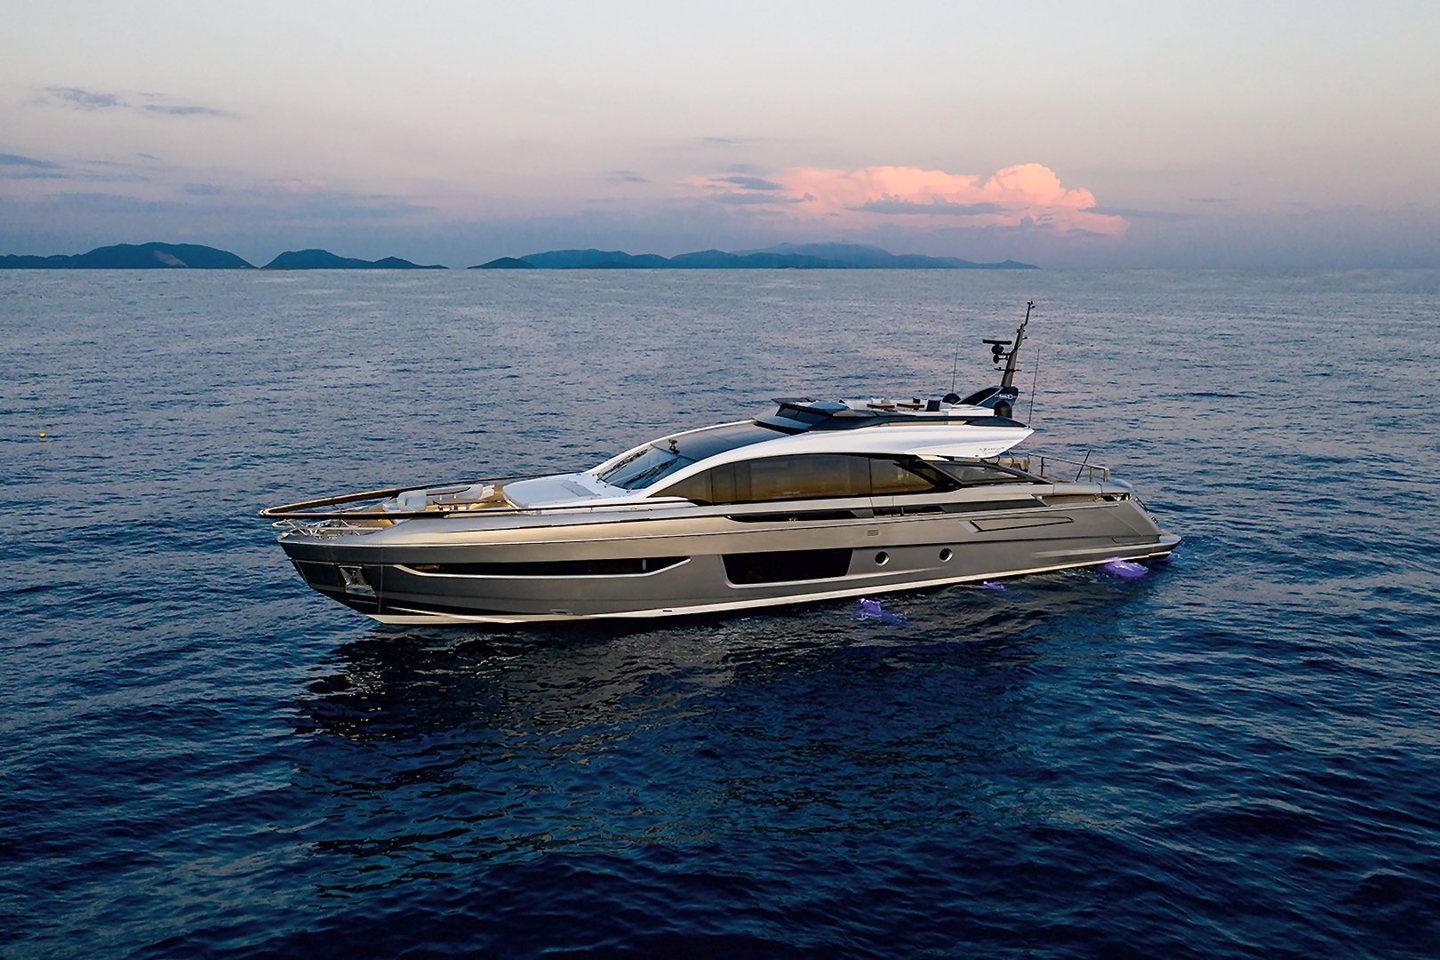 360 VR Virtual Tours of the Azimut S10